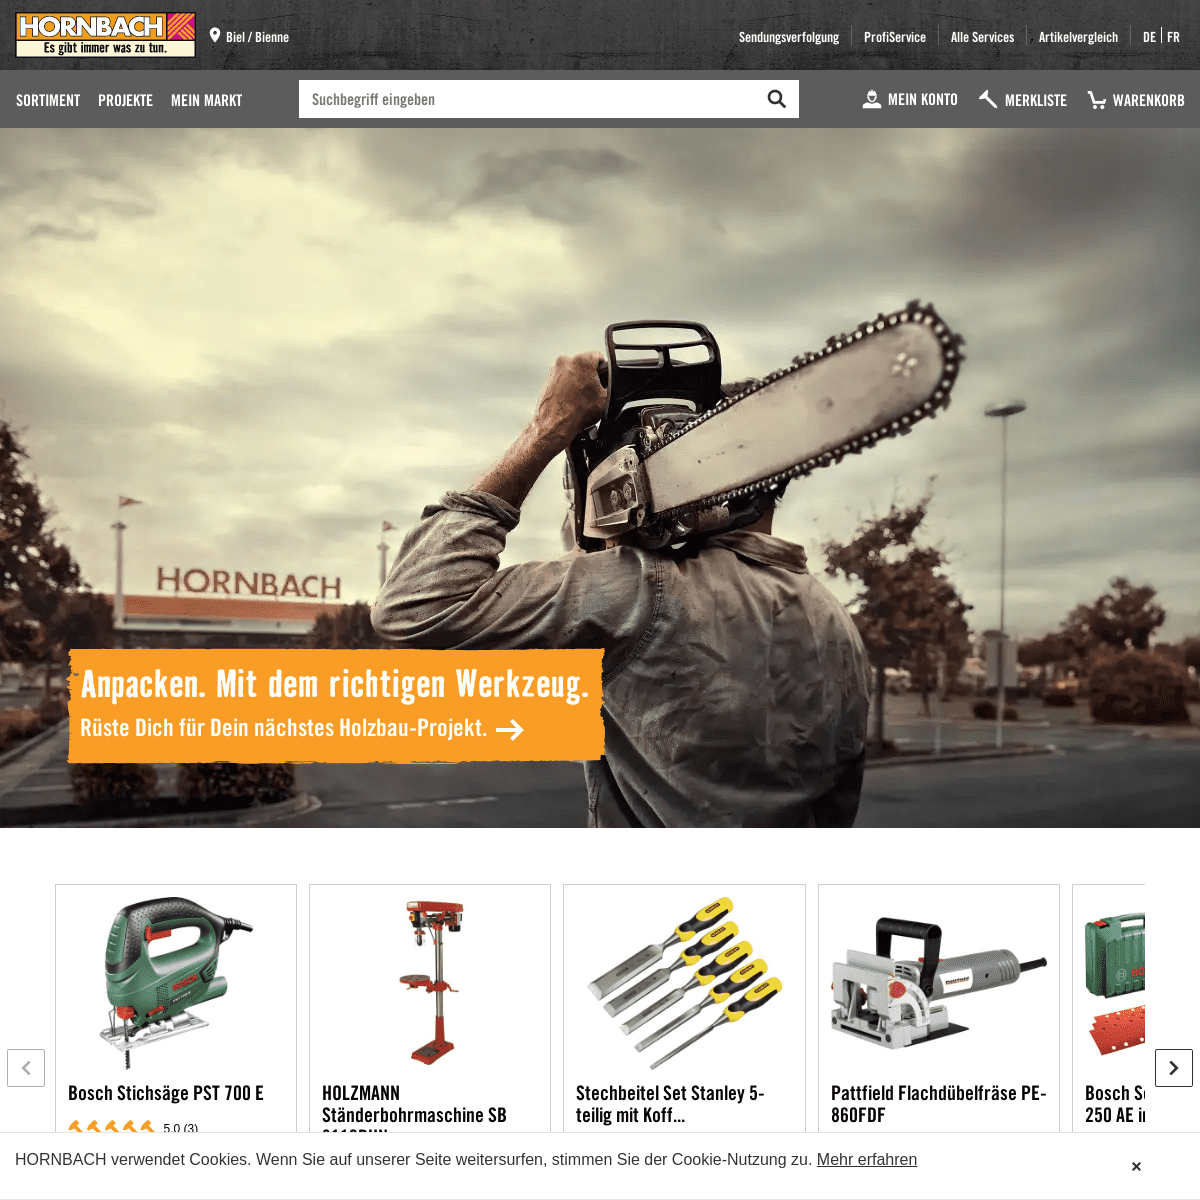 A complete backup of https://hornbach.ch